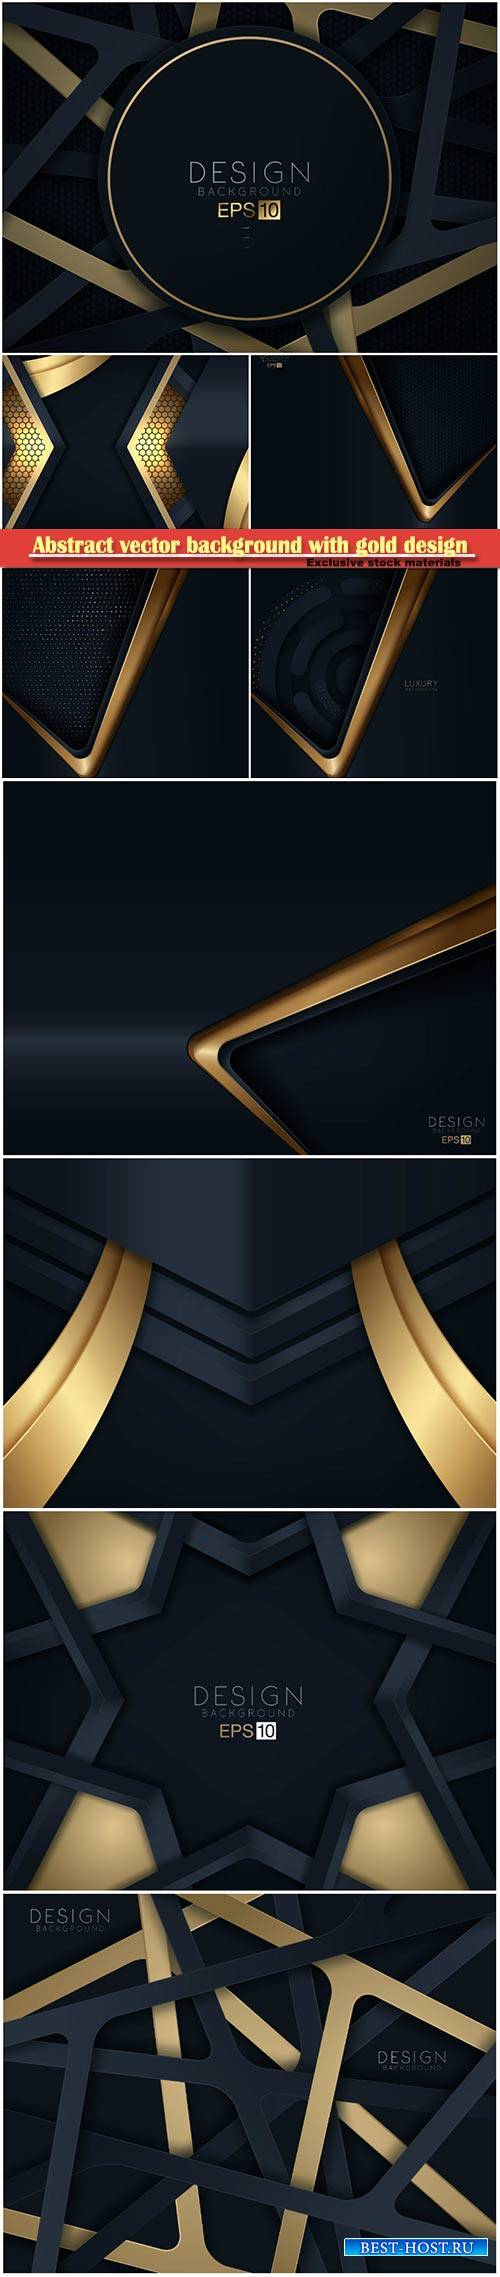 Abstract vector background with gold design